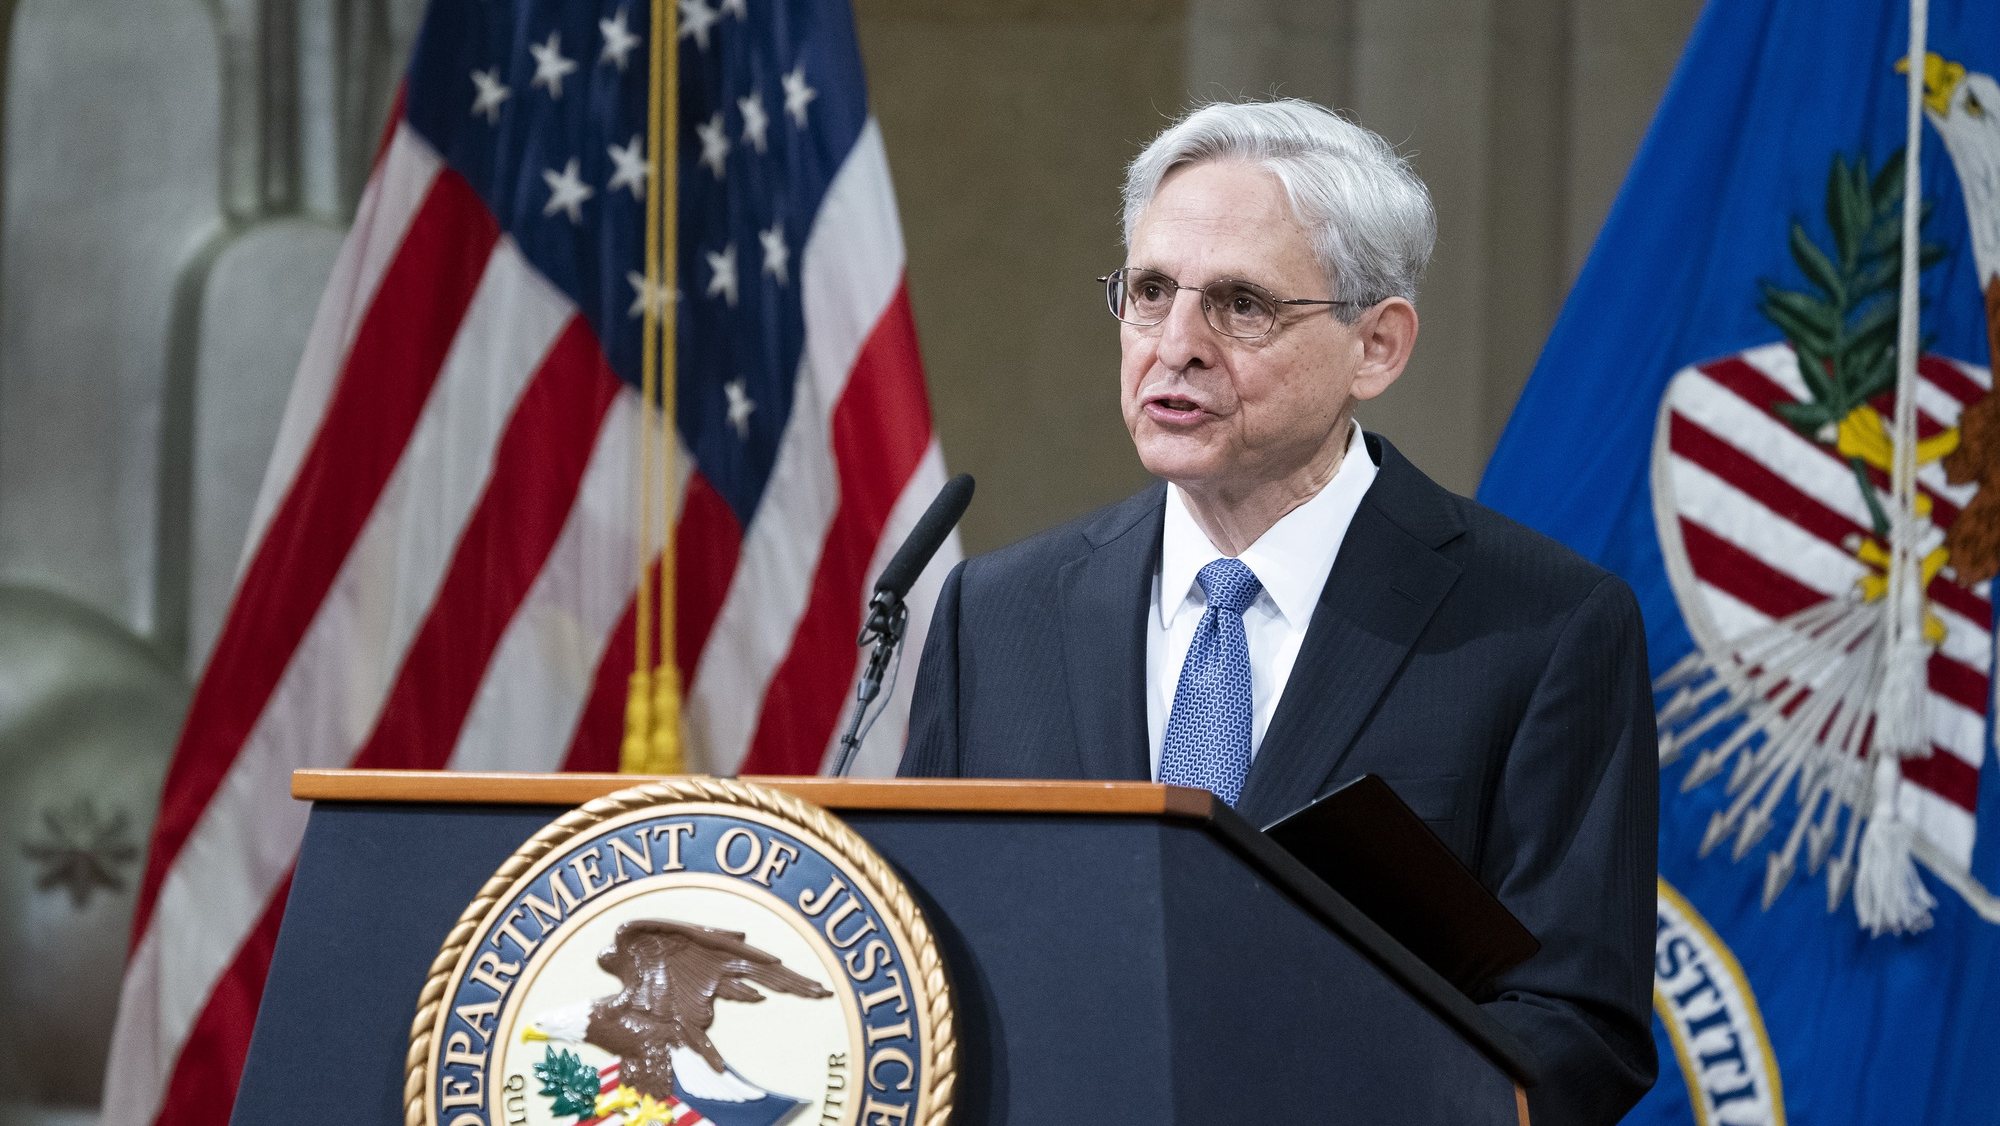 epa09067965 U.S. Attorney General Merrick Garland addresses staff on his first day at U.S. Department of Justice in Washington, DC, USA, 11 March 2021. Garland, a one time Supreme Court nominee under President Obama, was confirmed Wednesday 10 March by a Senate of vote of 70-30.  EPA/KEVIN DIETSCH / POOL